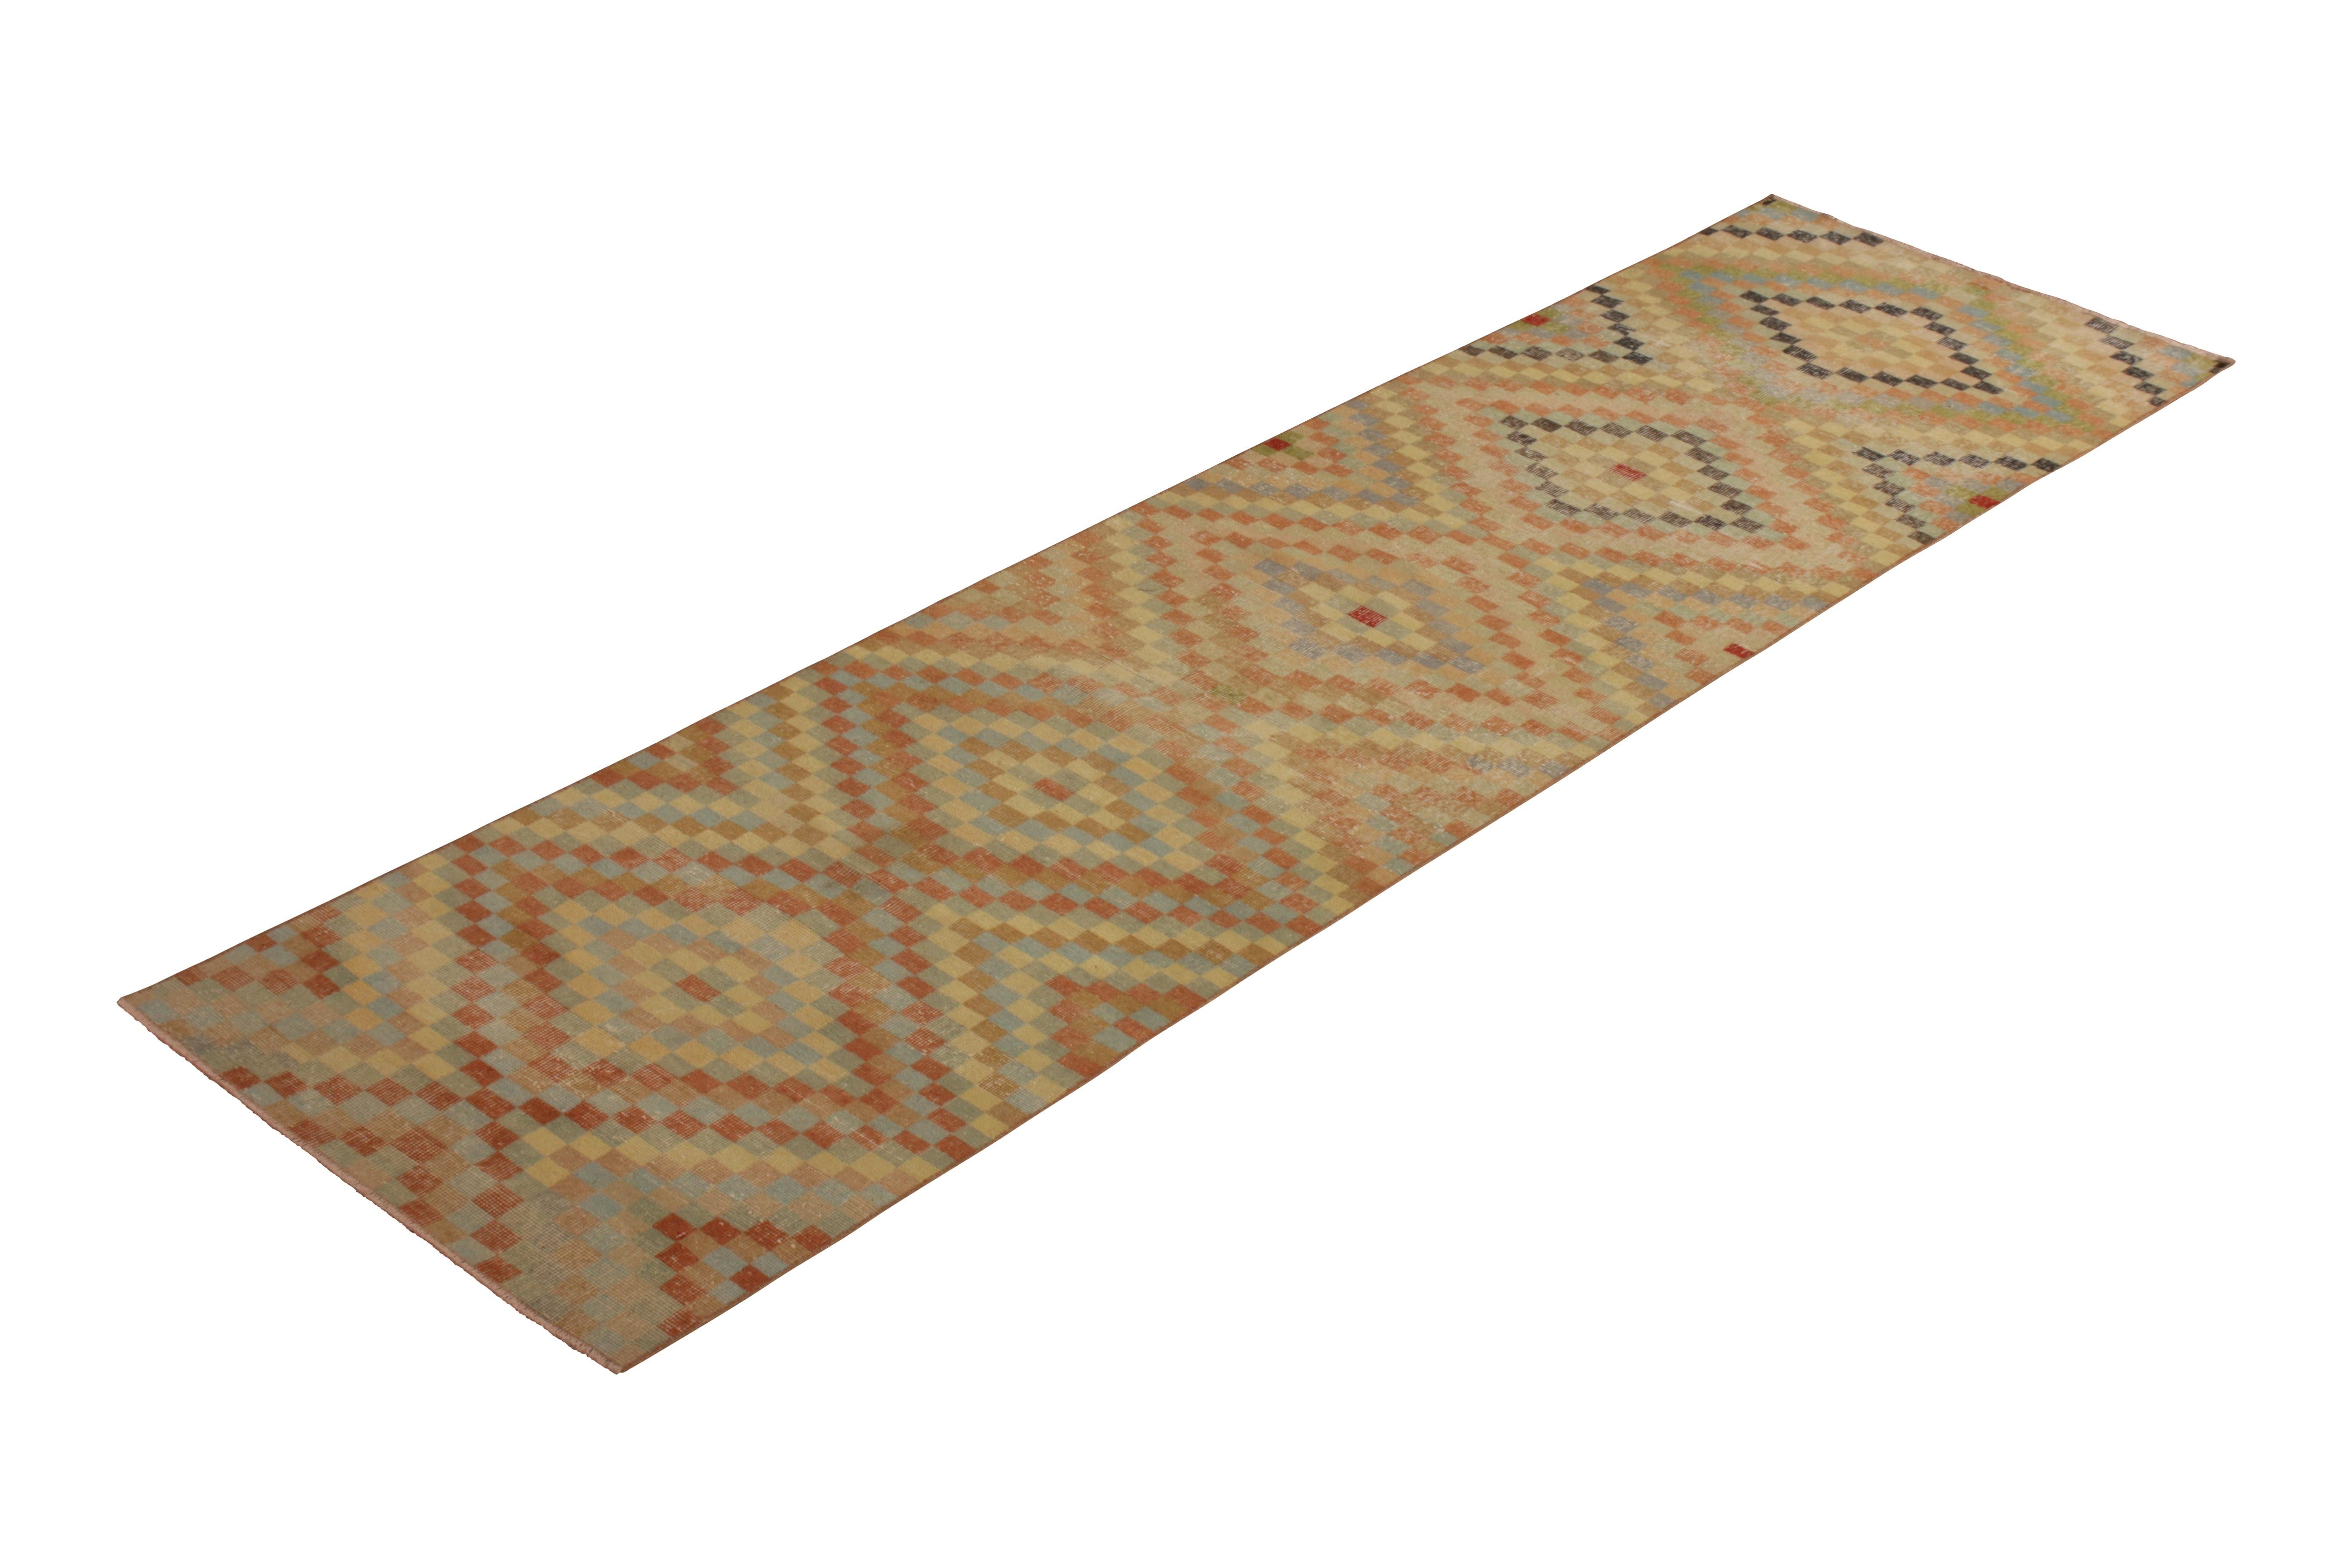 Hand knotted in Turkey originating between 1960-1970, this vintage midcentury runner joins Rug & Kilim’s midcentury Pasha collection celebrating Turkish icon Zeki Müren with Josh’s hand picked favorites from this period. The rippling diamond pattern